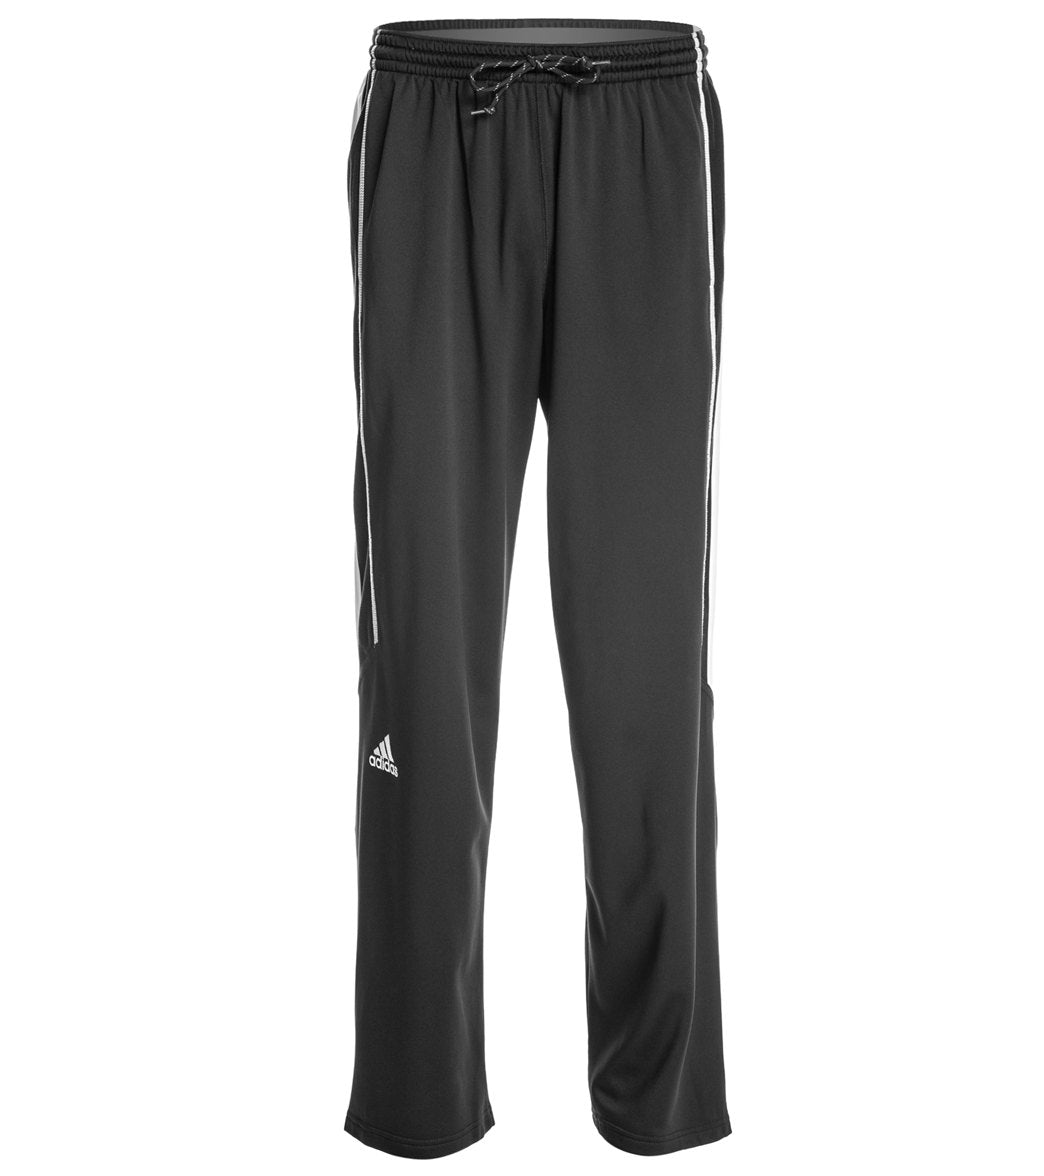 Adidas Men's Utility Warm Up Pants - Black Small Polyester - Swimoutlet.com